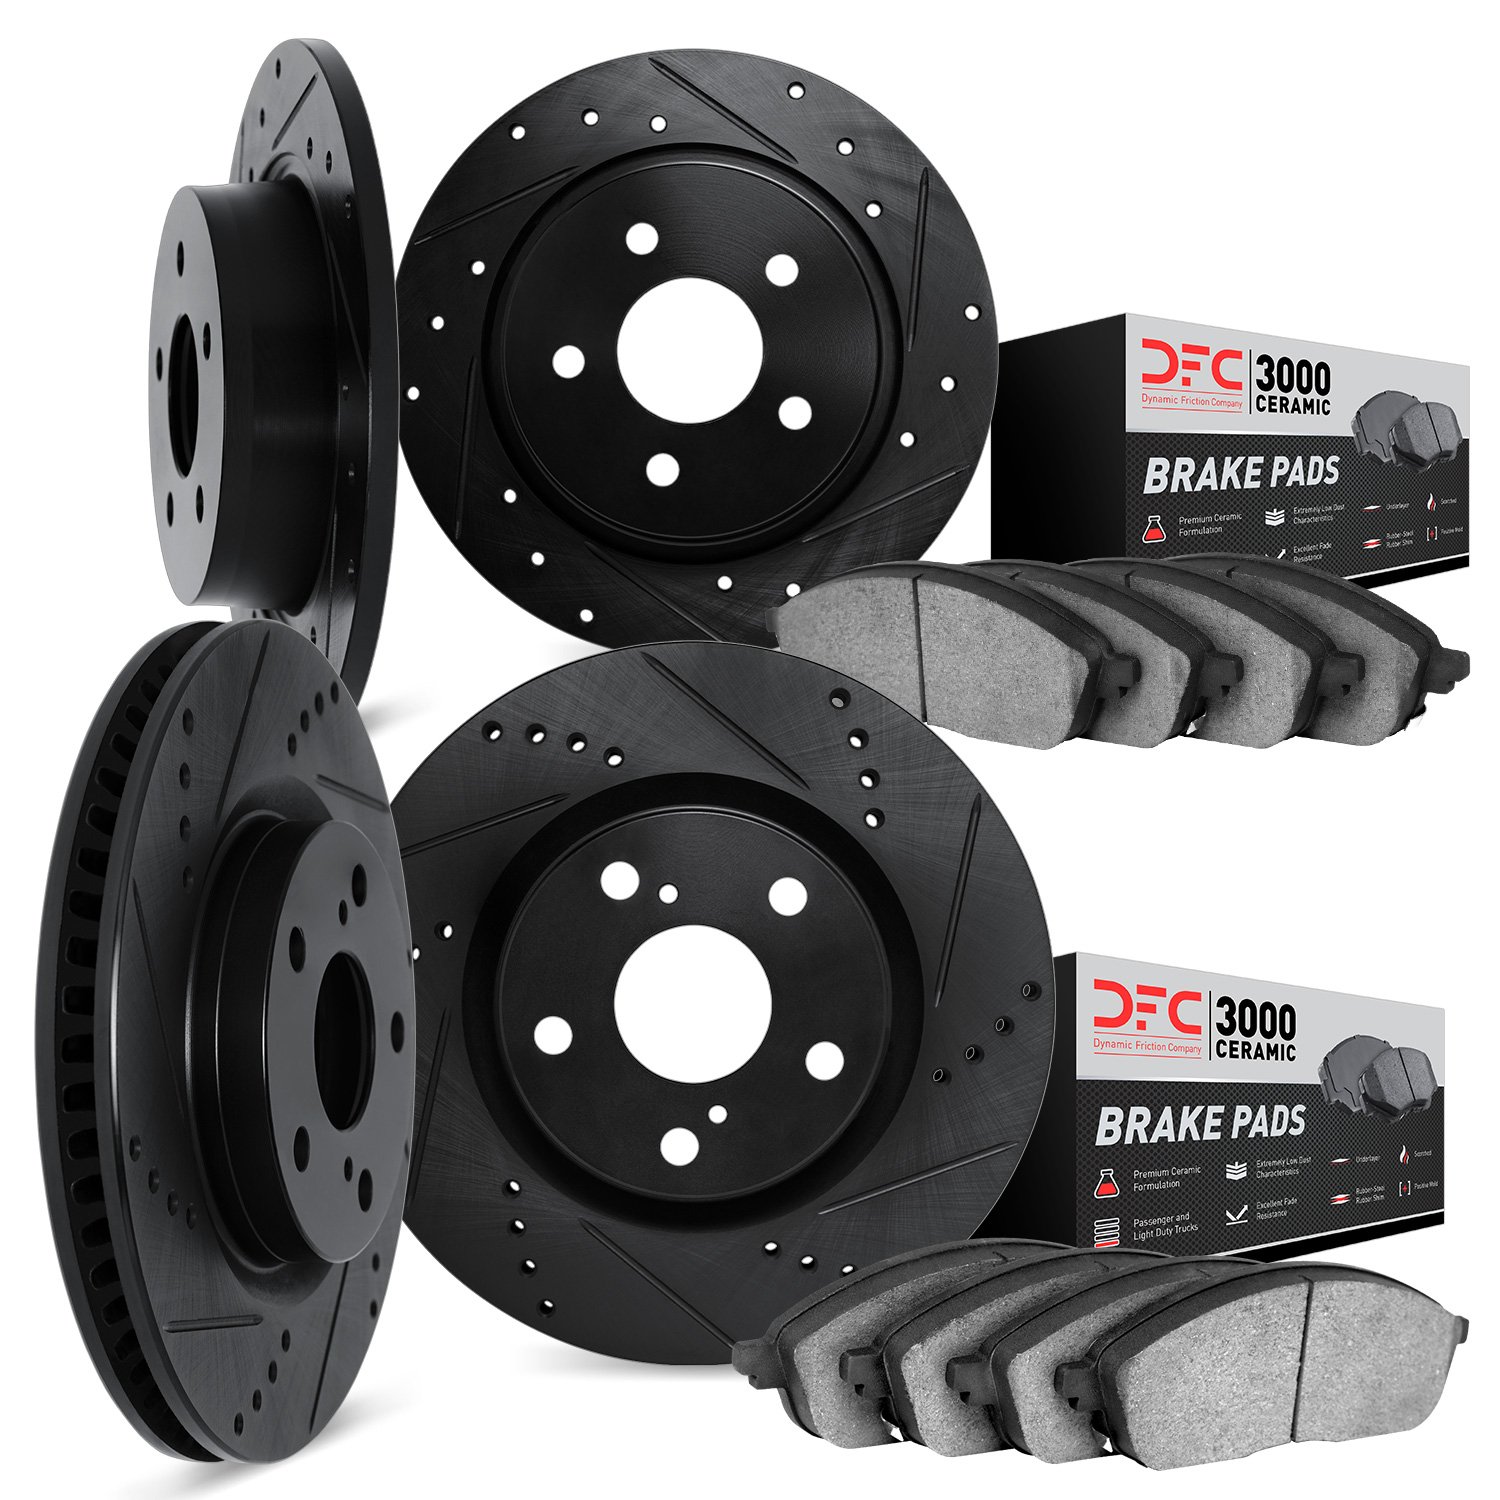 8304-40018 Drilled/Slotted Brake Rotors with 3000-Series Ceramic Brake Pads Kit [Black], 1998-2000 Mopar, Position: Front and Re